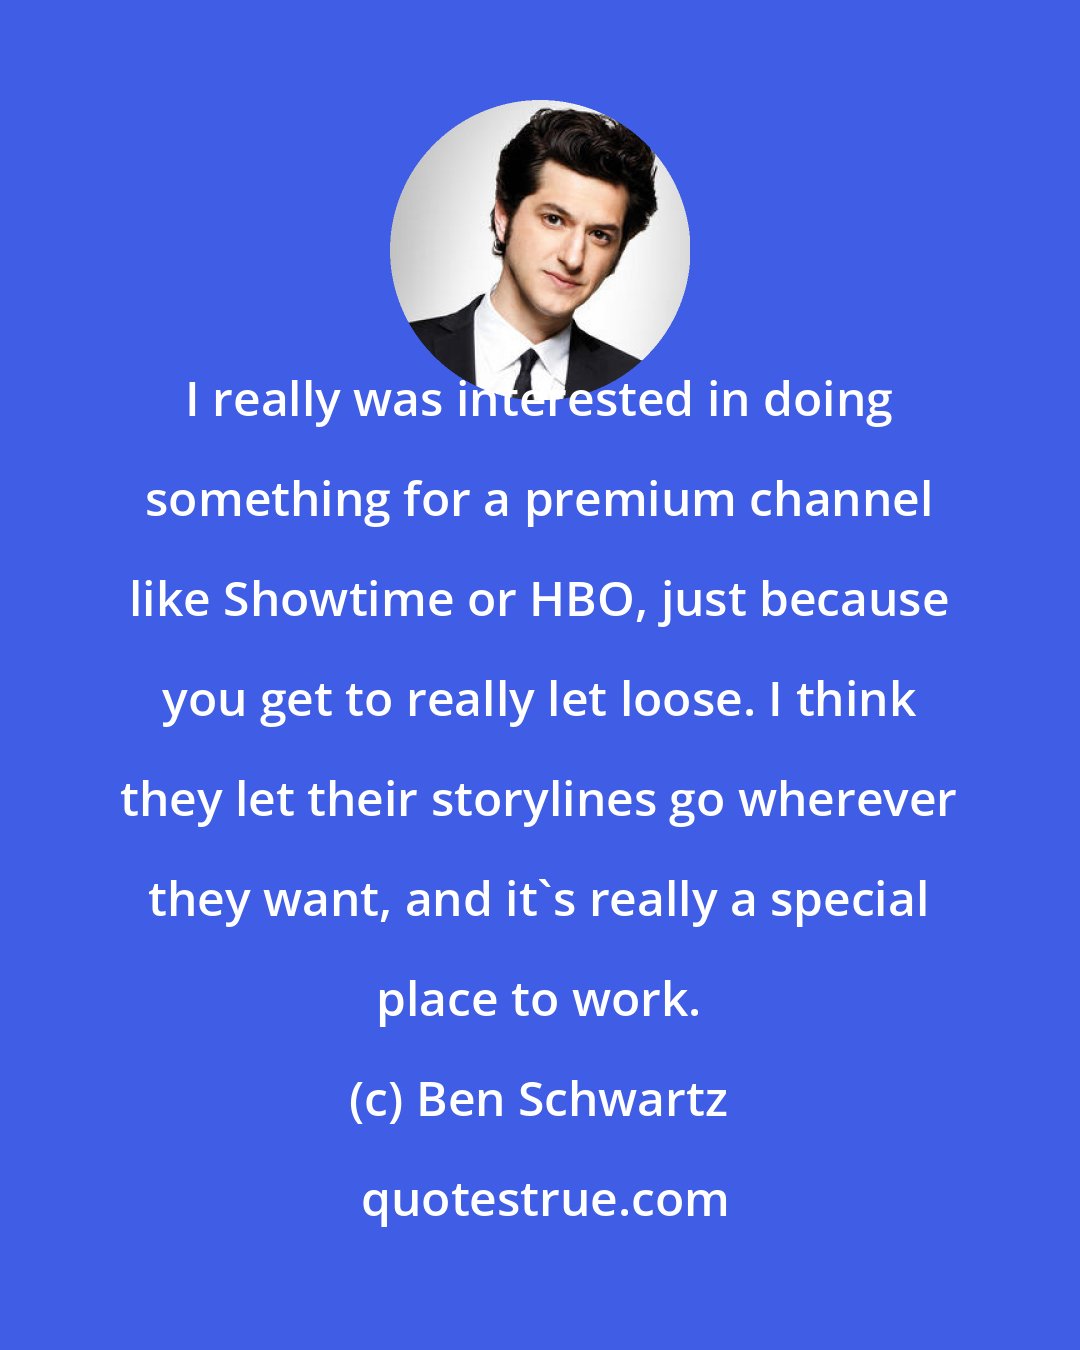 Ben Schwartz: I really was interested in doing something for a premium channel like Showtime or HBO, just because you get to really let loose. I think they let their storylines go wherever they want, and it's really a special place to work.